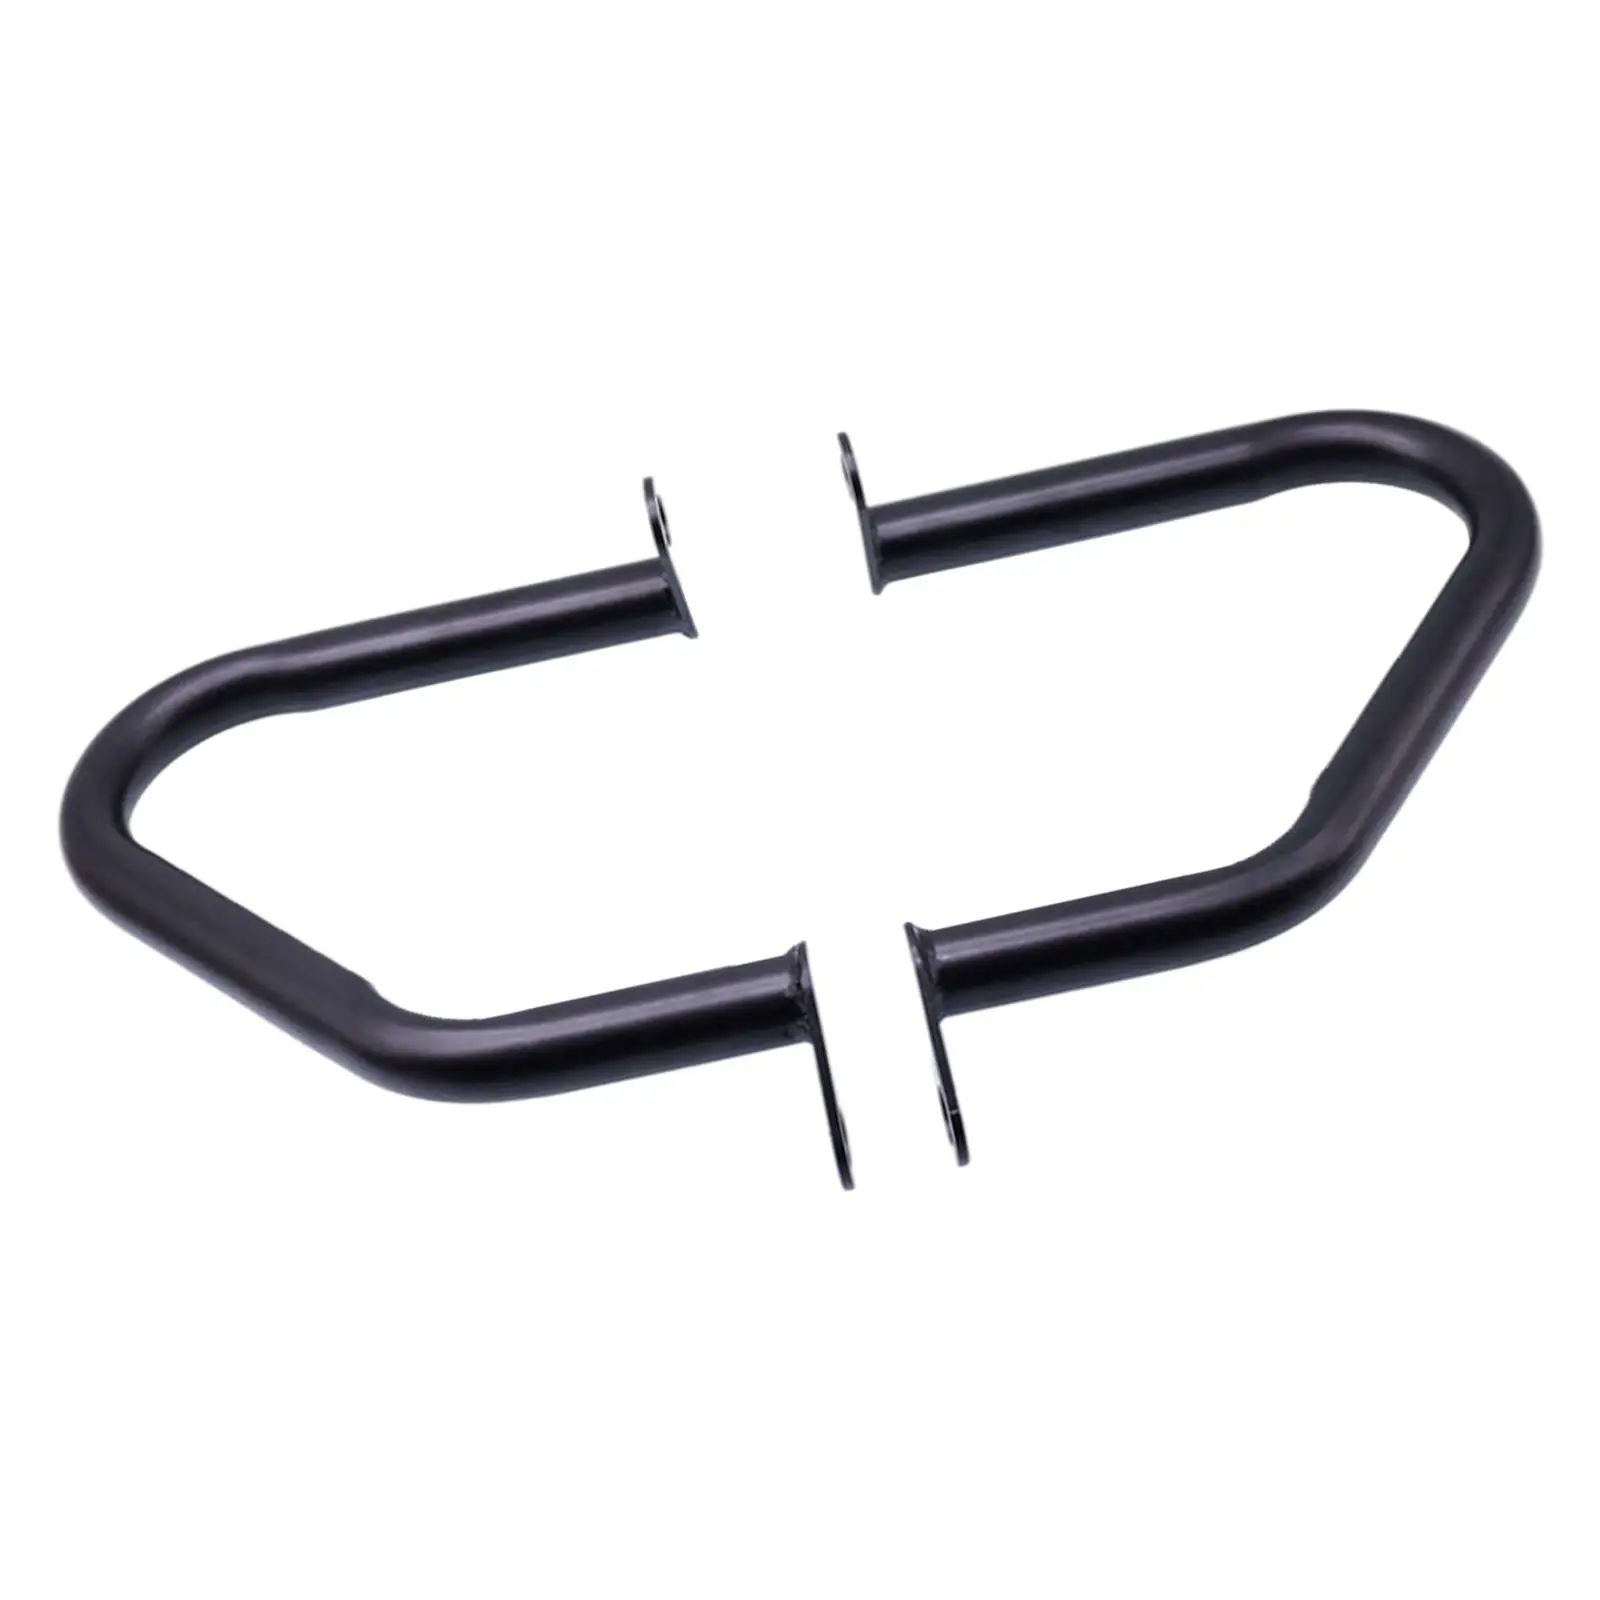 Engine Guard Crash Bars Replaces for T120  Durable Professional